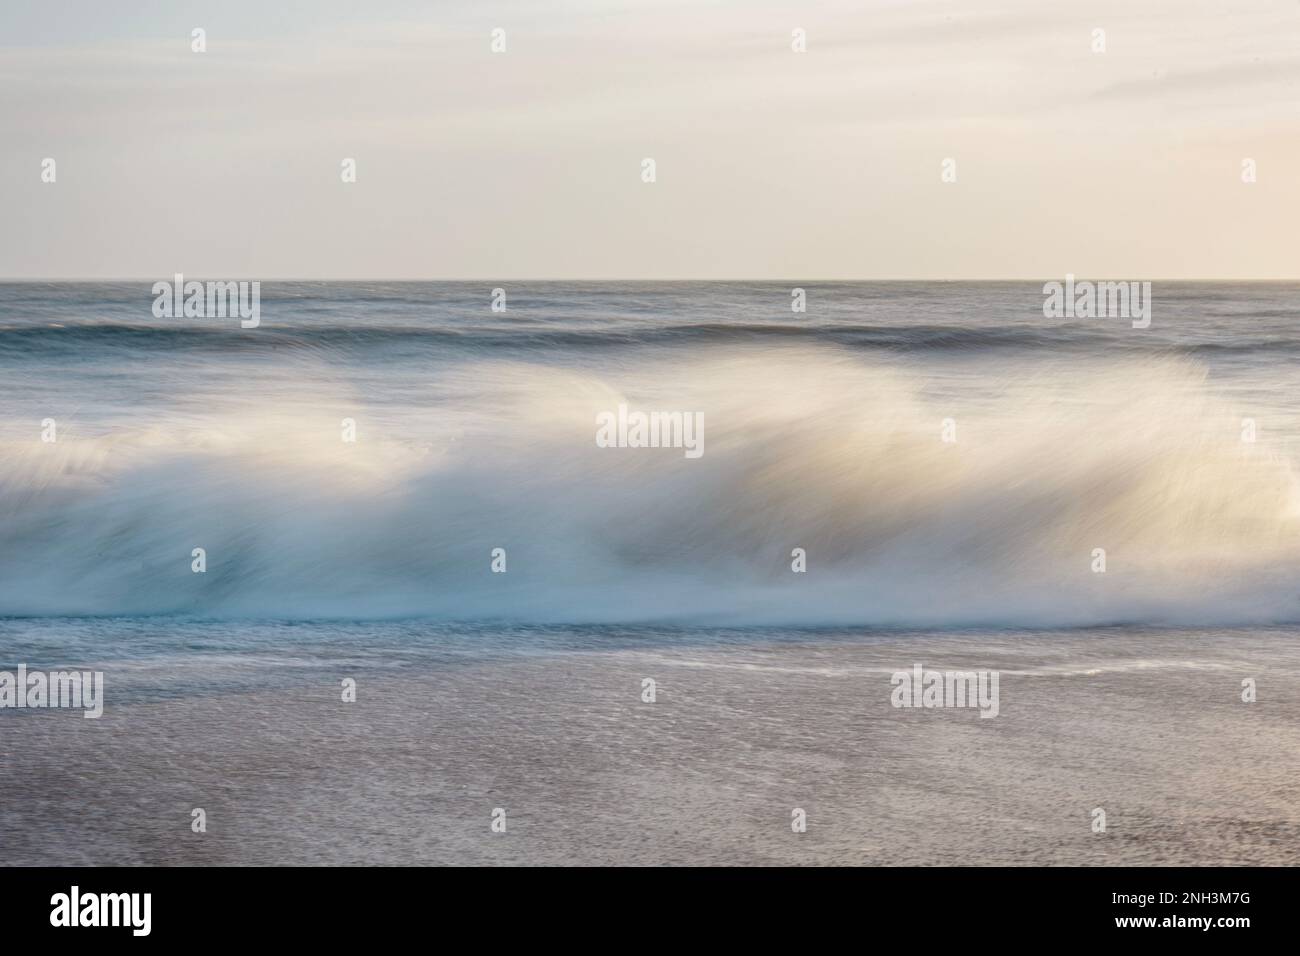 Intentional camera movement of a wave crashing on the beach at Worthing, West Sussex, UK Stock Photo